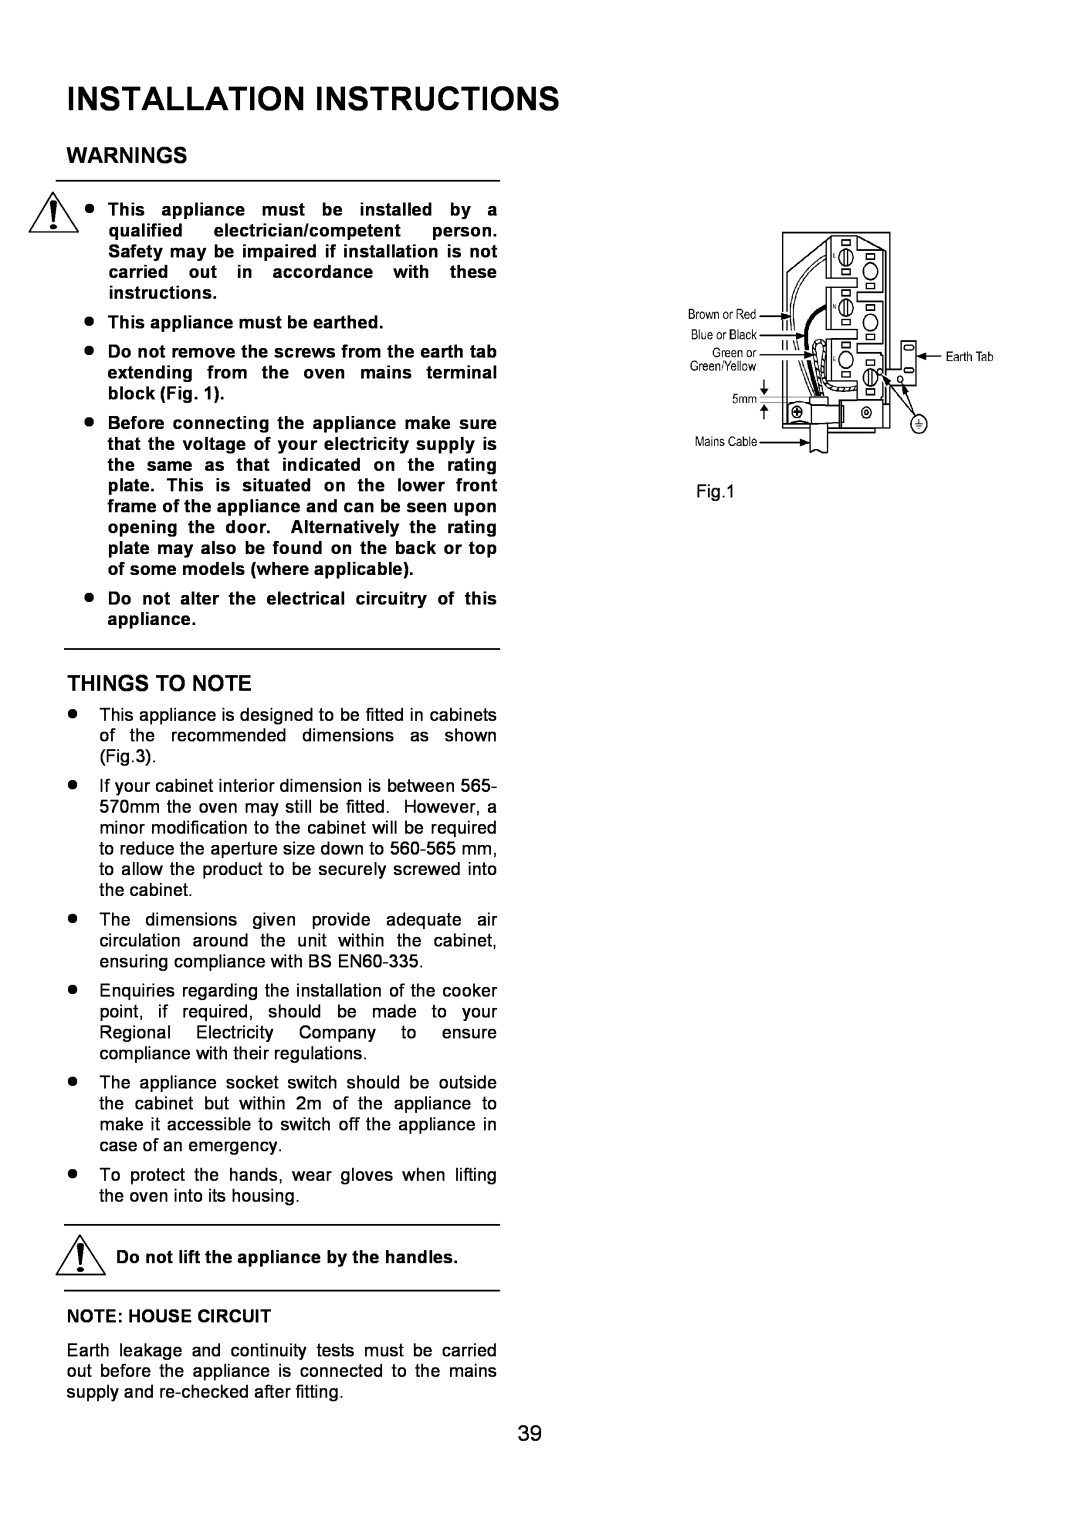 Electrolux D4101-4 operating instructions Installation Instructions, Warnings, Things To Note 